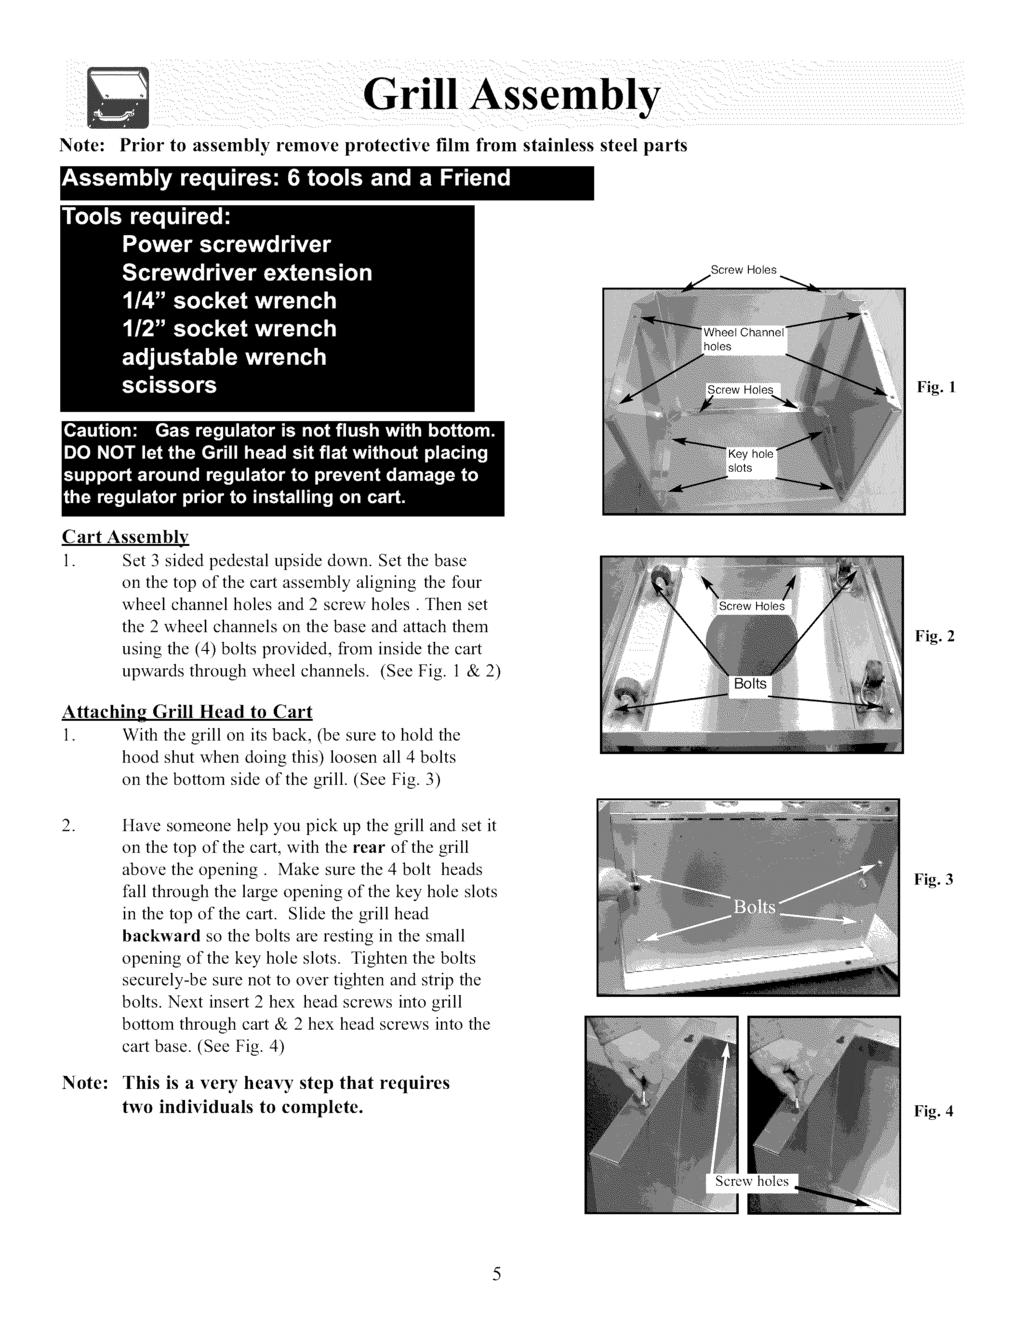 Note: Prior to assembly remove protective film from stainless steel parts Screw Holes 3crew Holes Fig 1 Cart Assembly Set 3 sided pedestal upside down Set the base on the top of the cart assembly